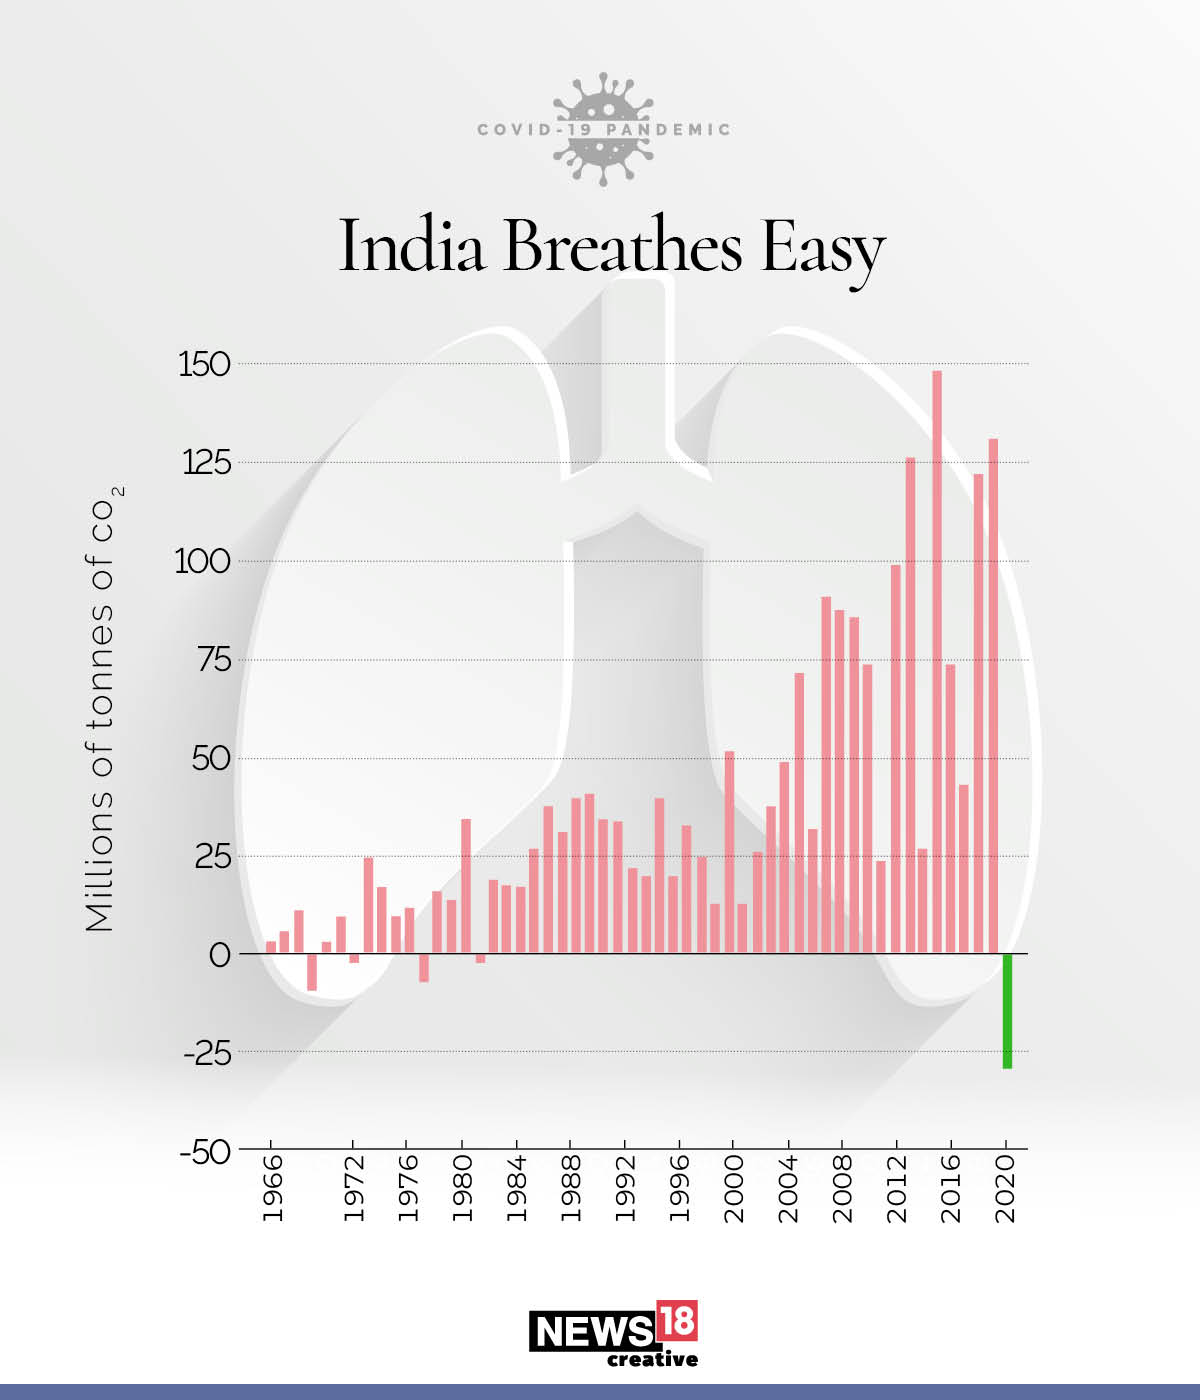 Lockdown: CO2 emissions in India fall for the first time in 40 years